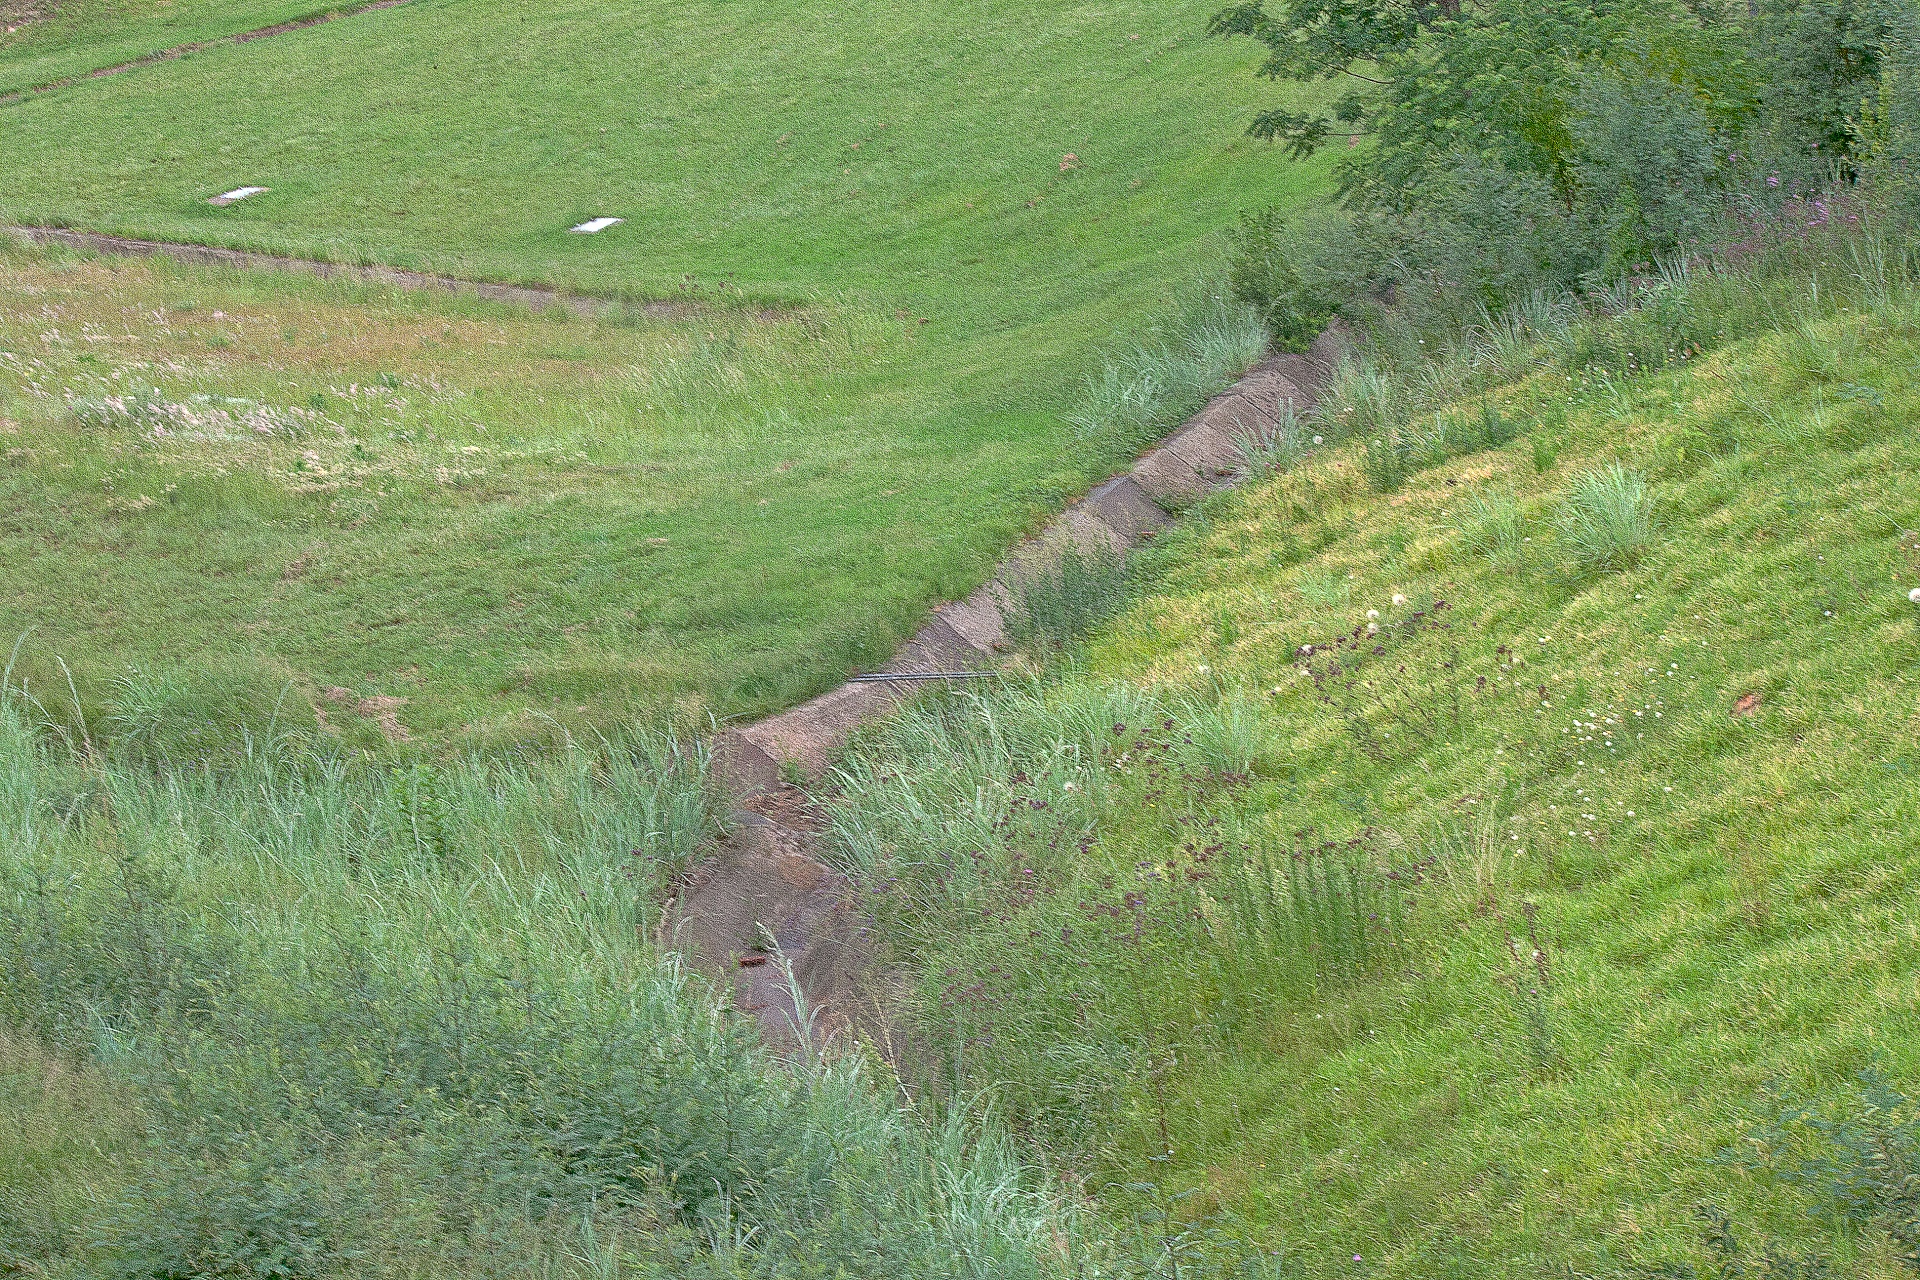 Downsloping Ditch